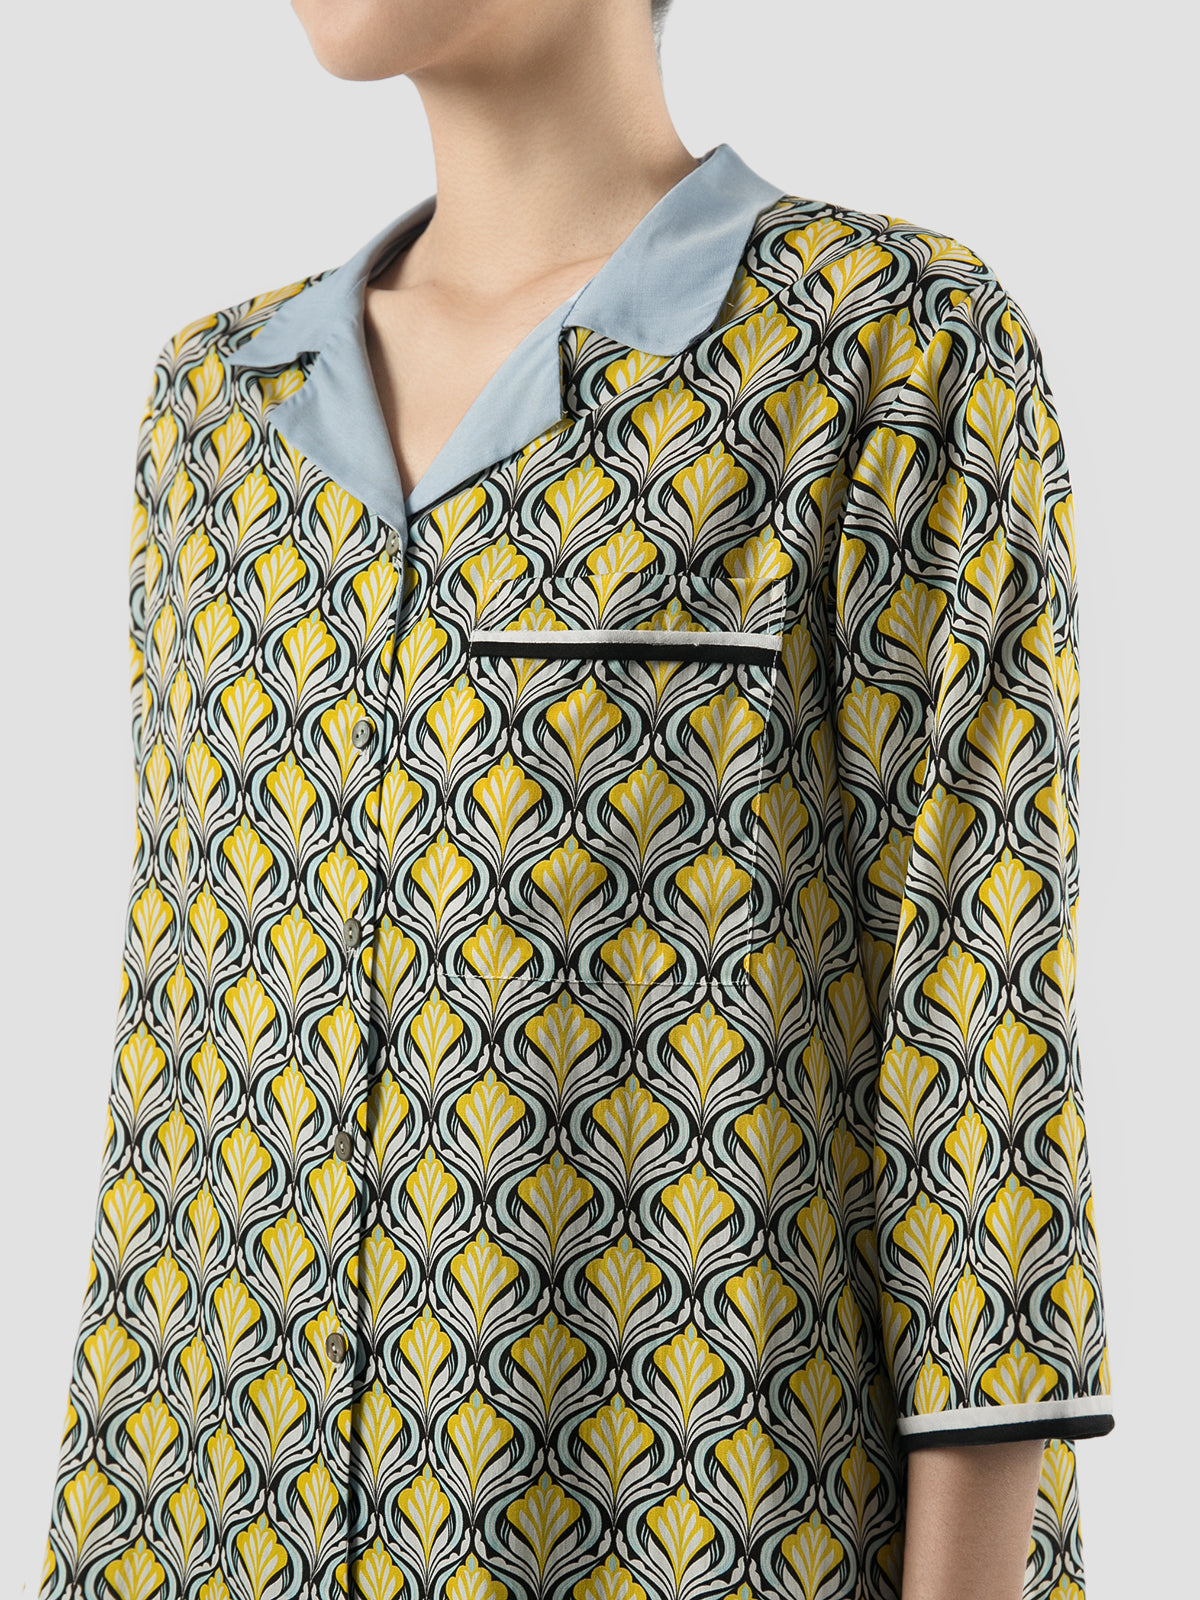 Biva Contrasted Collar Shirt In Yellow-Black